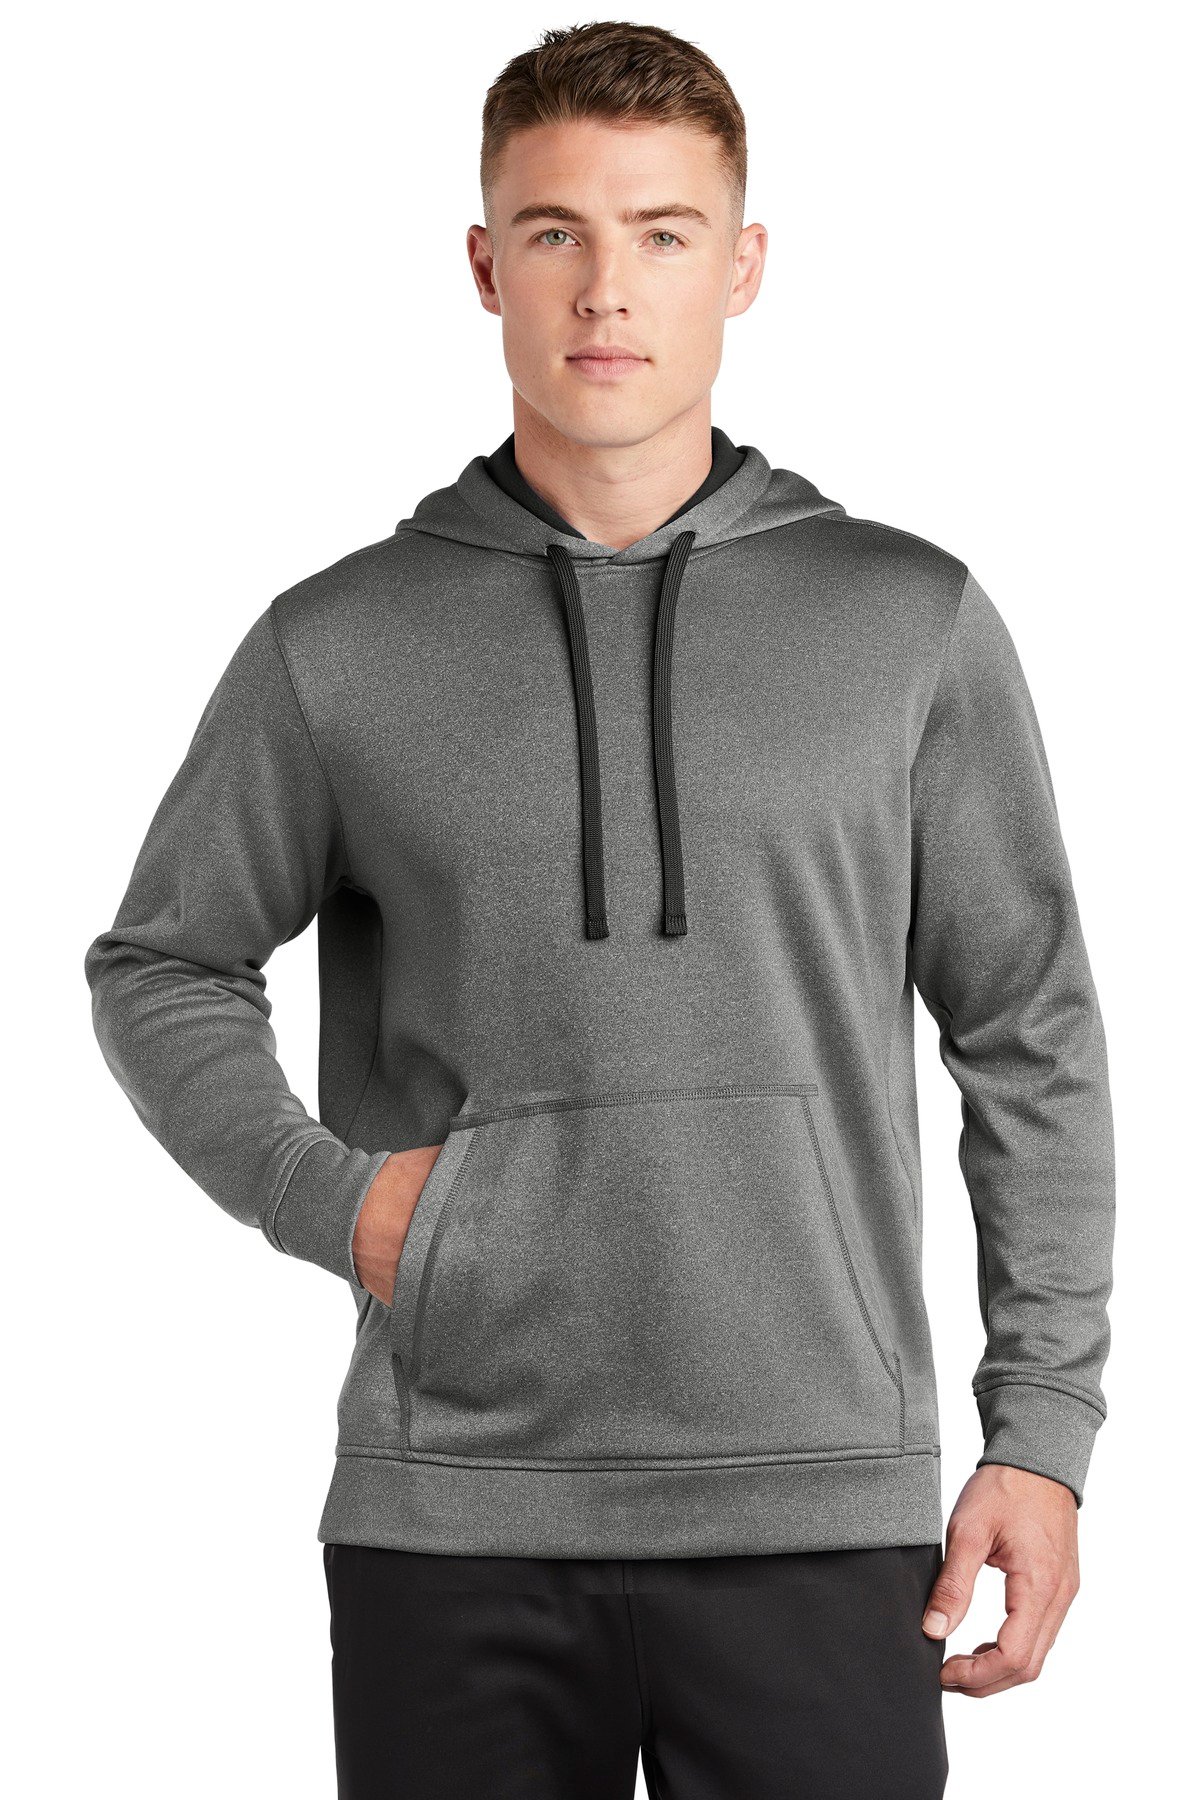 Front view of PosiCharge ® Sport-Wick ® Heather Fleece Hooded Pullover